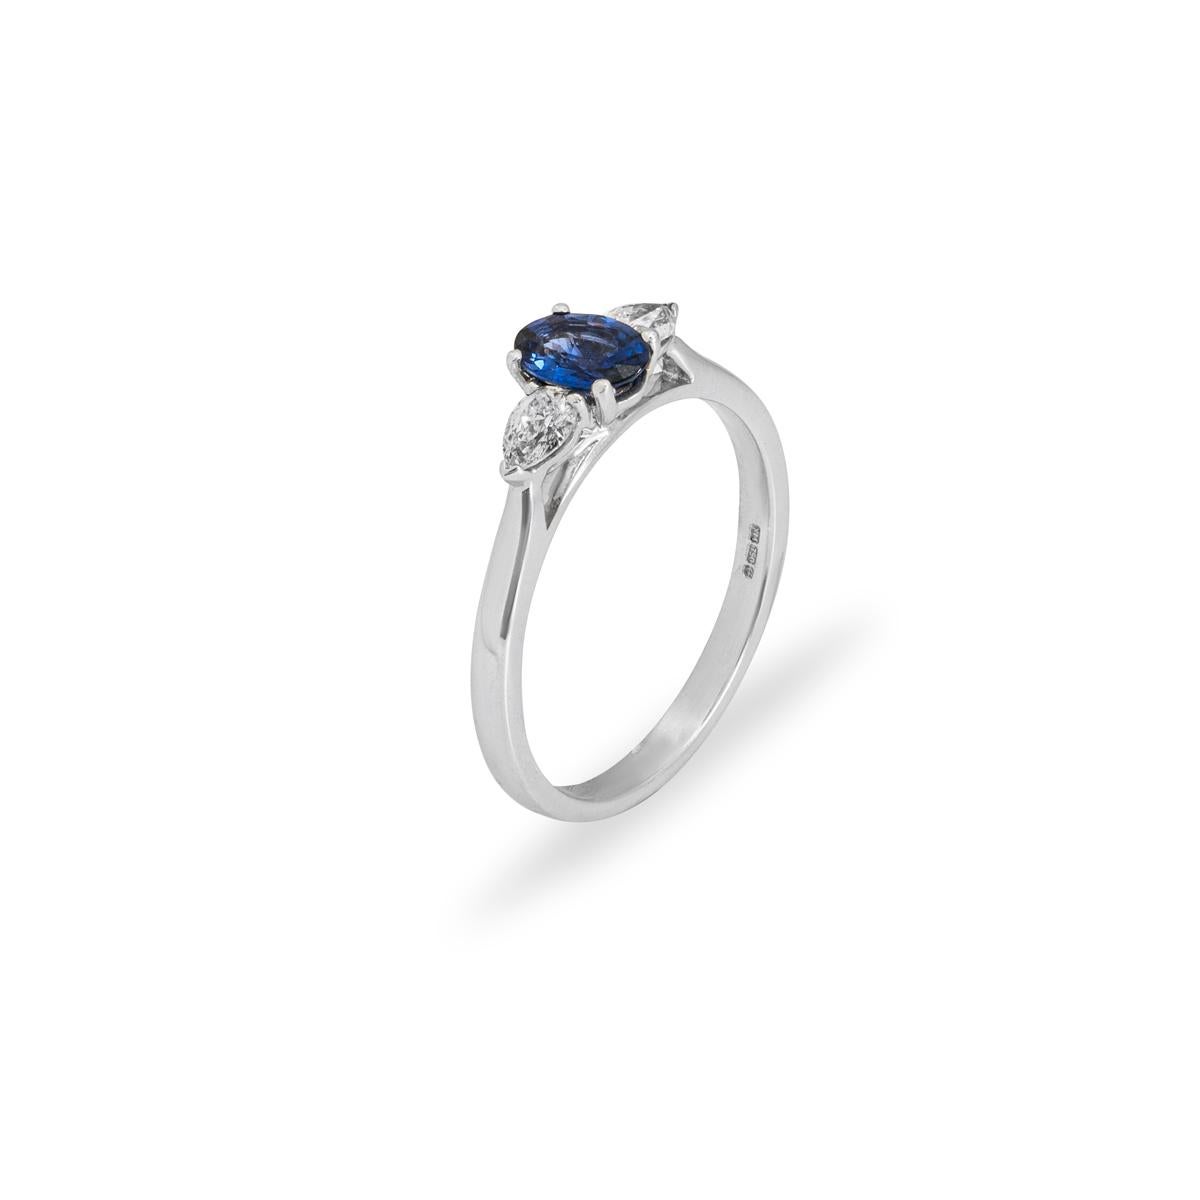 An 18k white gold sapphire and diamond ring. The ring is set to the centre with an oval cut sapphire weighing 0.26ct, displaying a rich even tone. Either side of the central stone sit single pear cut diamonds each weighing approximately 0.16ct,